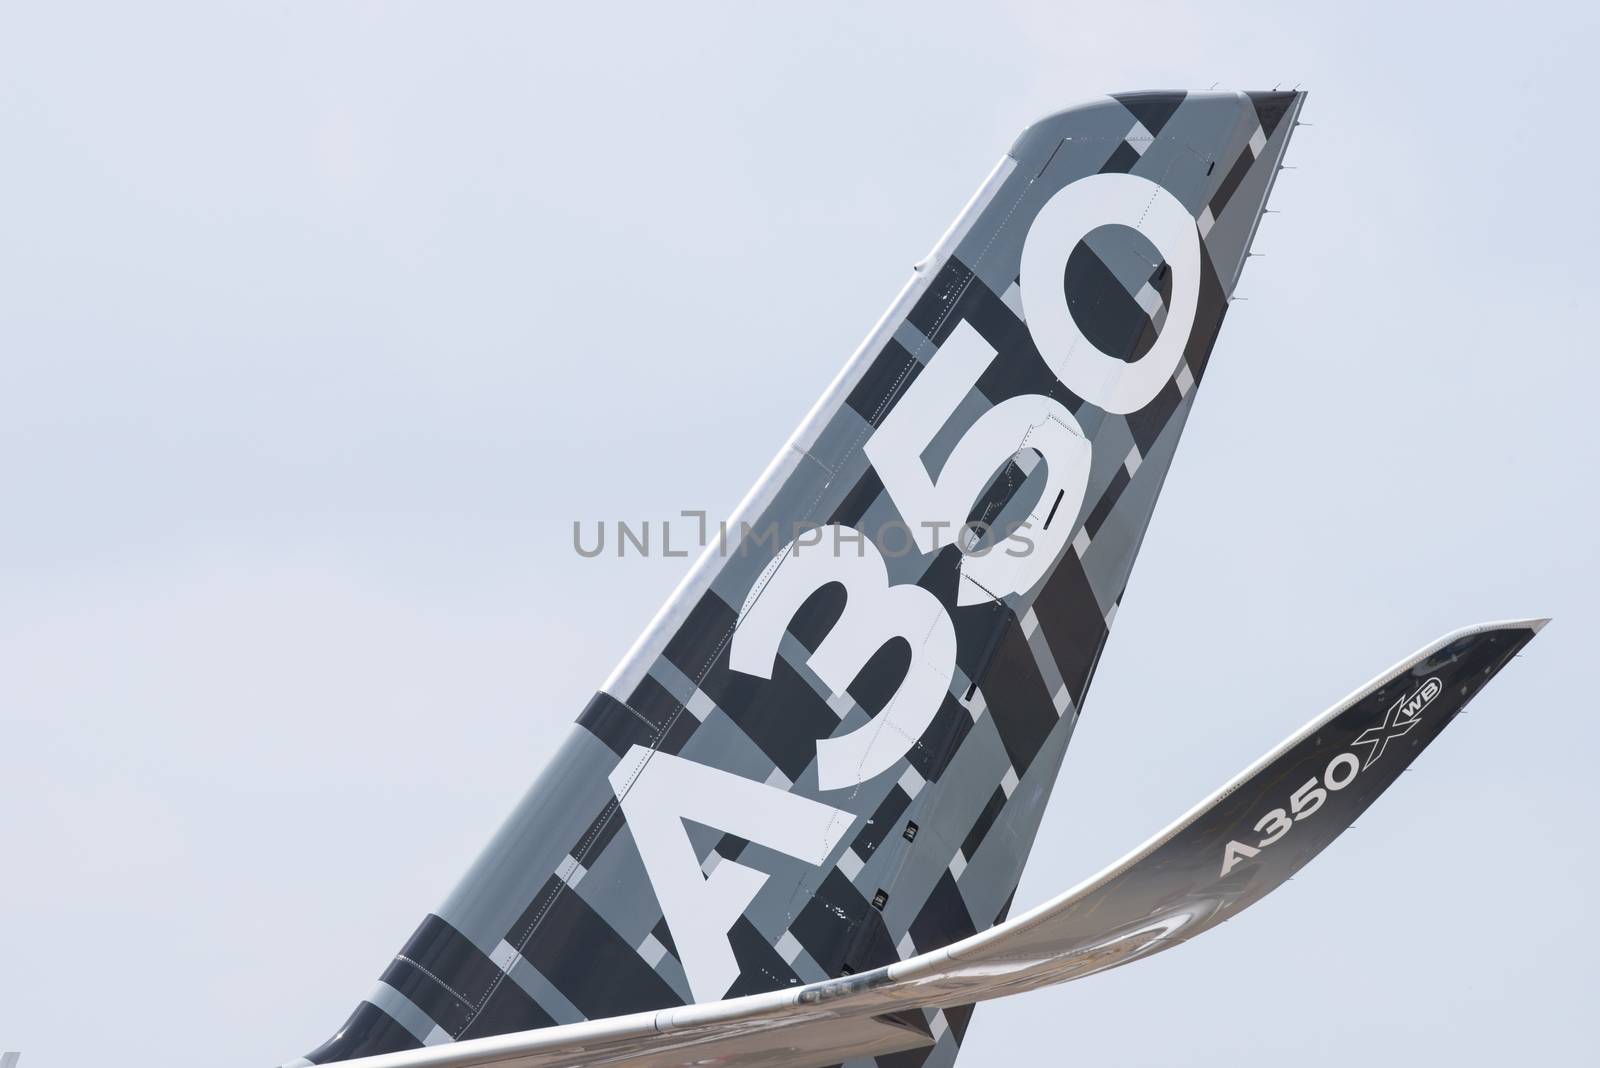 Singapore - February 17, 2016: Tailplane and winglet of an Airbus A350 XWB in Airbus factory livery during Singapore Airshow at Changi Exhibition Centre in Singapore.